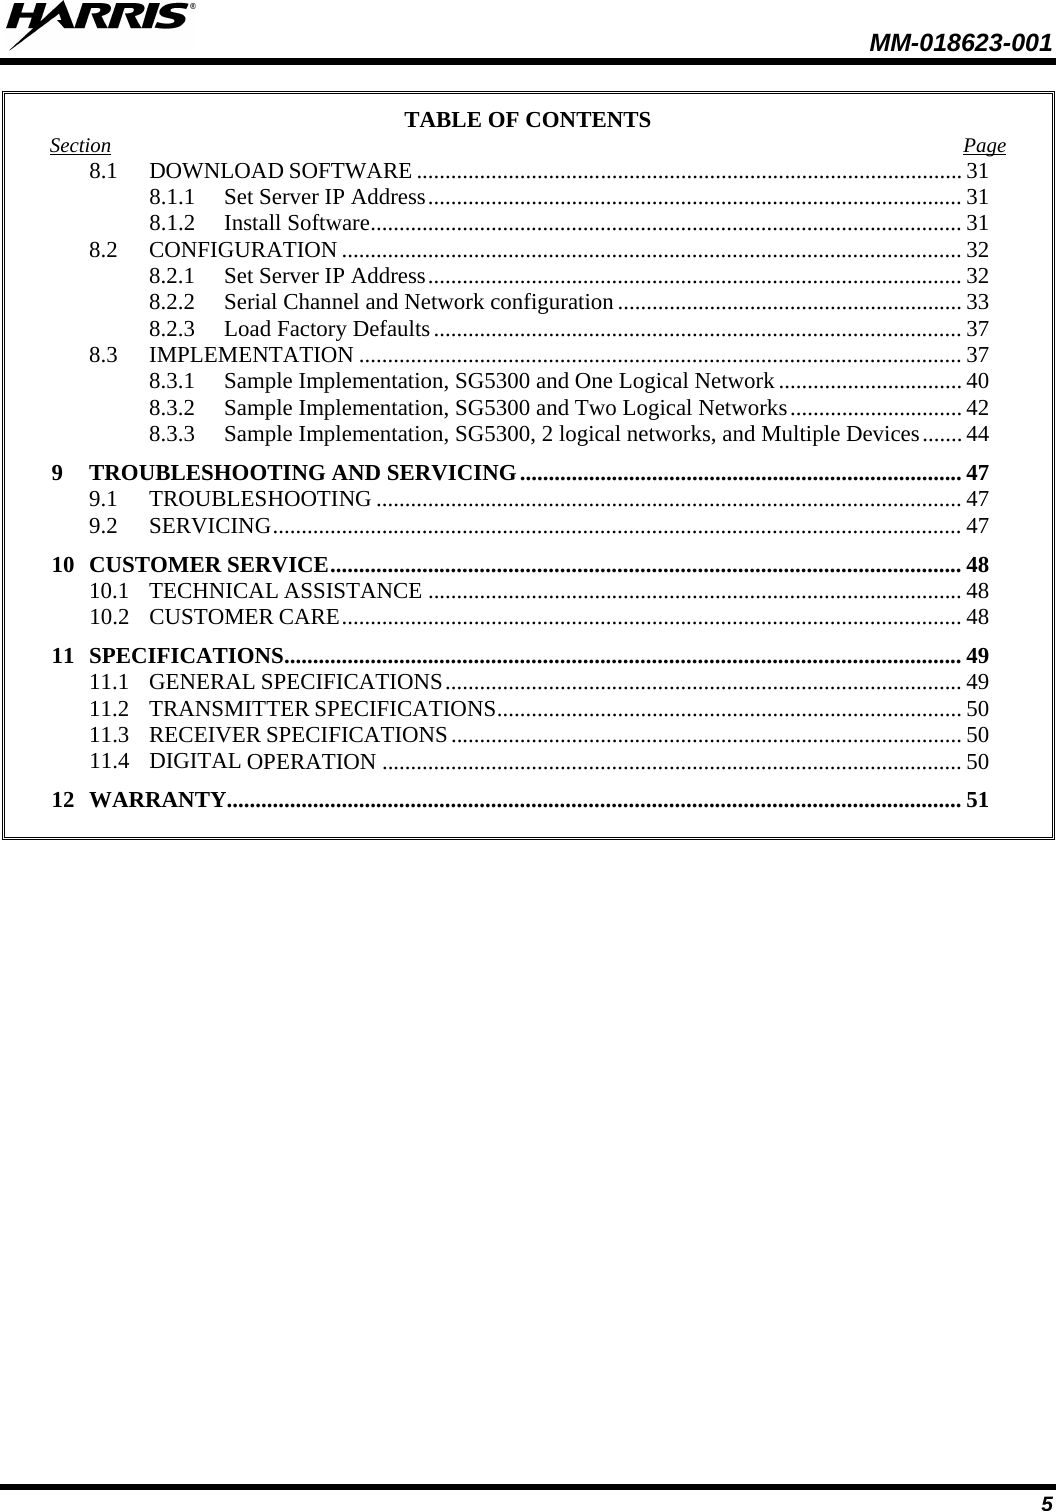  MM-018623-001   5 TABLE OF CONTENTS Section Page 8.1 DOWNLOAD SOFTWARE ............................................................................................... 31 8.1.1 Set Server IP Address ............................................................................................. 31 8.1.2 Install Software ....................................................................................................... 31 8.2 CONFIGURATION ............................................................................................................ 32 8.2.1 Set Server IP Address ............................................................................................. 32 8.2.2 Serial Channel and Network configuration ............................................................ 33 8.2.3 Load Factory Defaults ............................................................................................ 37 8.3 IMPLEMENTATION ......................................................................................................... 37 8.3.1 Sample Implementation, SG5300 and One Logical Network ................................ 40 8.3.2 Sample Implementation, SG5300 and Two Logical Networks .............................. 42 8.3.3 Sample Implementation, SG5300, 2 logical networks, and Multiple Devices ....... 44 9 TROUBLESHOOTING AND SERVICING ............................................................................. 47 9.1 TROUBLESHOOTING ...................................................................................................... 47 9.2 SERVICING ........................................................................................................................ 47 10 CUSTOMER SERVICE .............................................................................................................. 48 10.1 TECHNICAL ASSISTANCE ............................................................................................. 48 10.2 CUSTOMER CARE ............................................................................................................ 48 11 SPECIFICATIONS ...................................................................................................................... 49 11.1 GENERAL SPECIFICATIONS .......................................................................................... 49 11.2 TRANSMITTER SPECIFICATIONS ................................................................................. 50 11.3 RECEIVER SPECIFICATIONS ......................................................................................... 50 11.4 DIGITAL OPERATION ..................................................................................................... 50 12 WARRANTY................................................................................................................................ 51  